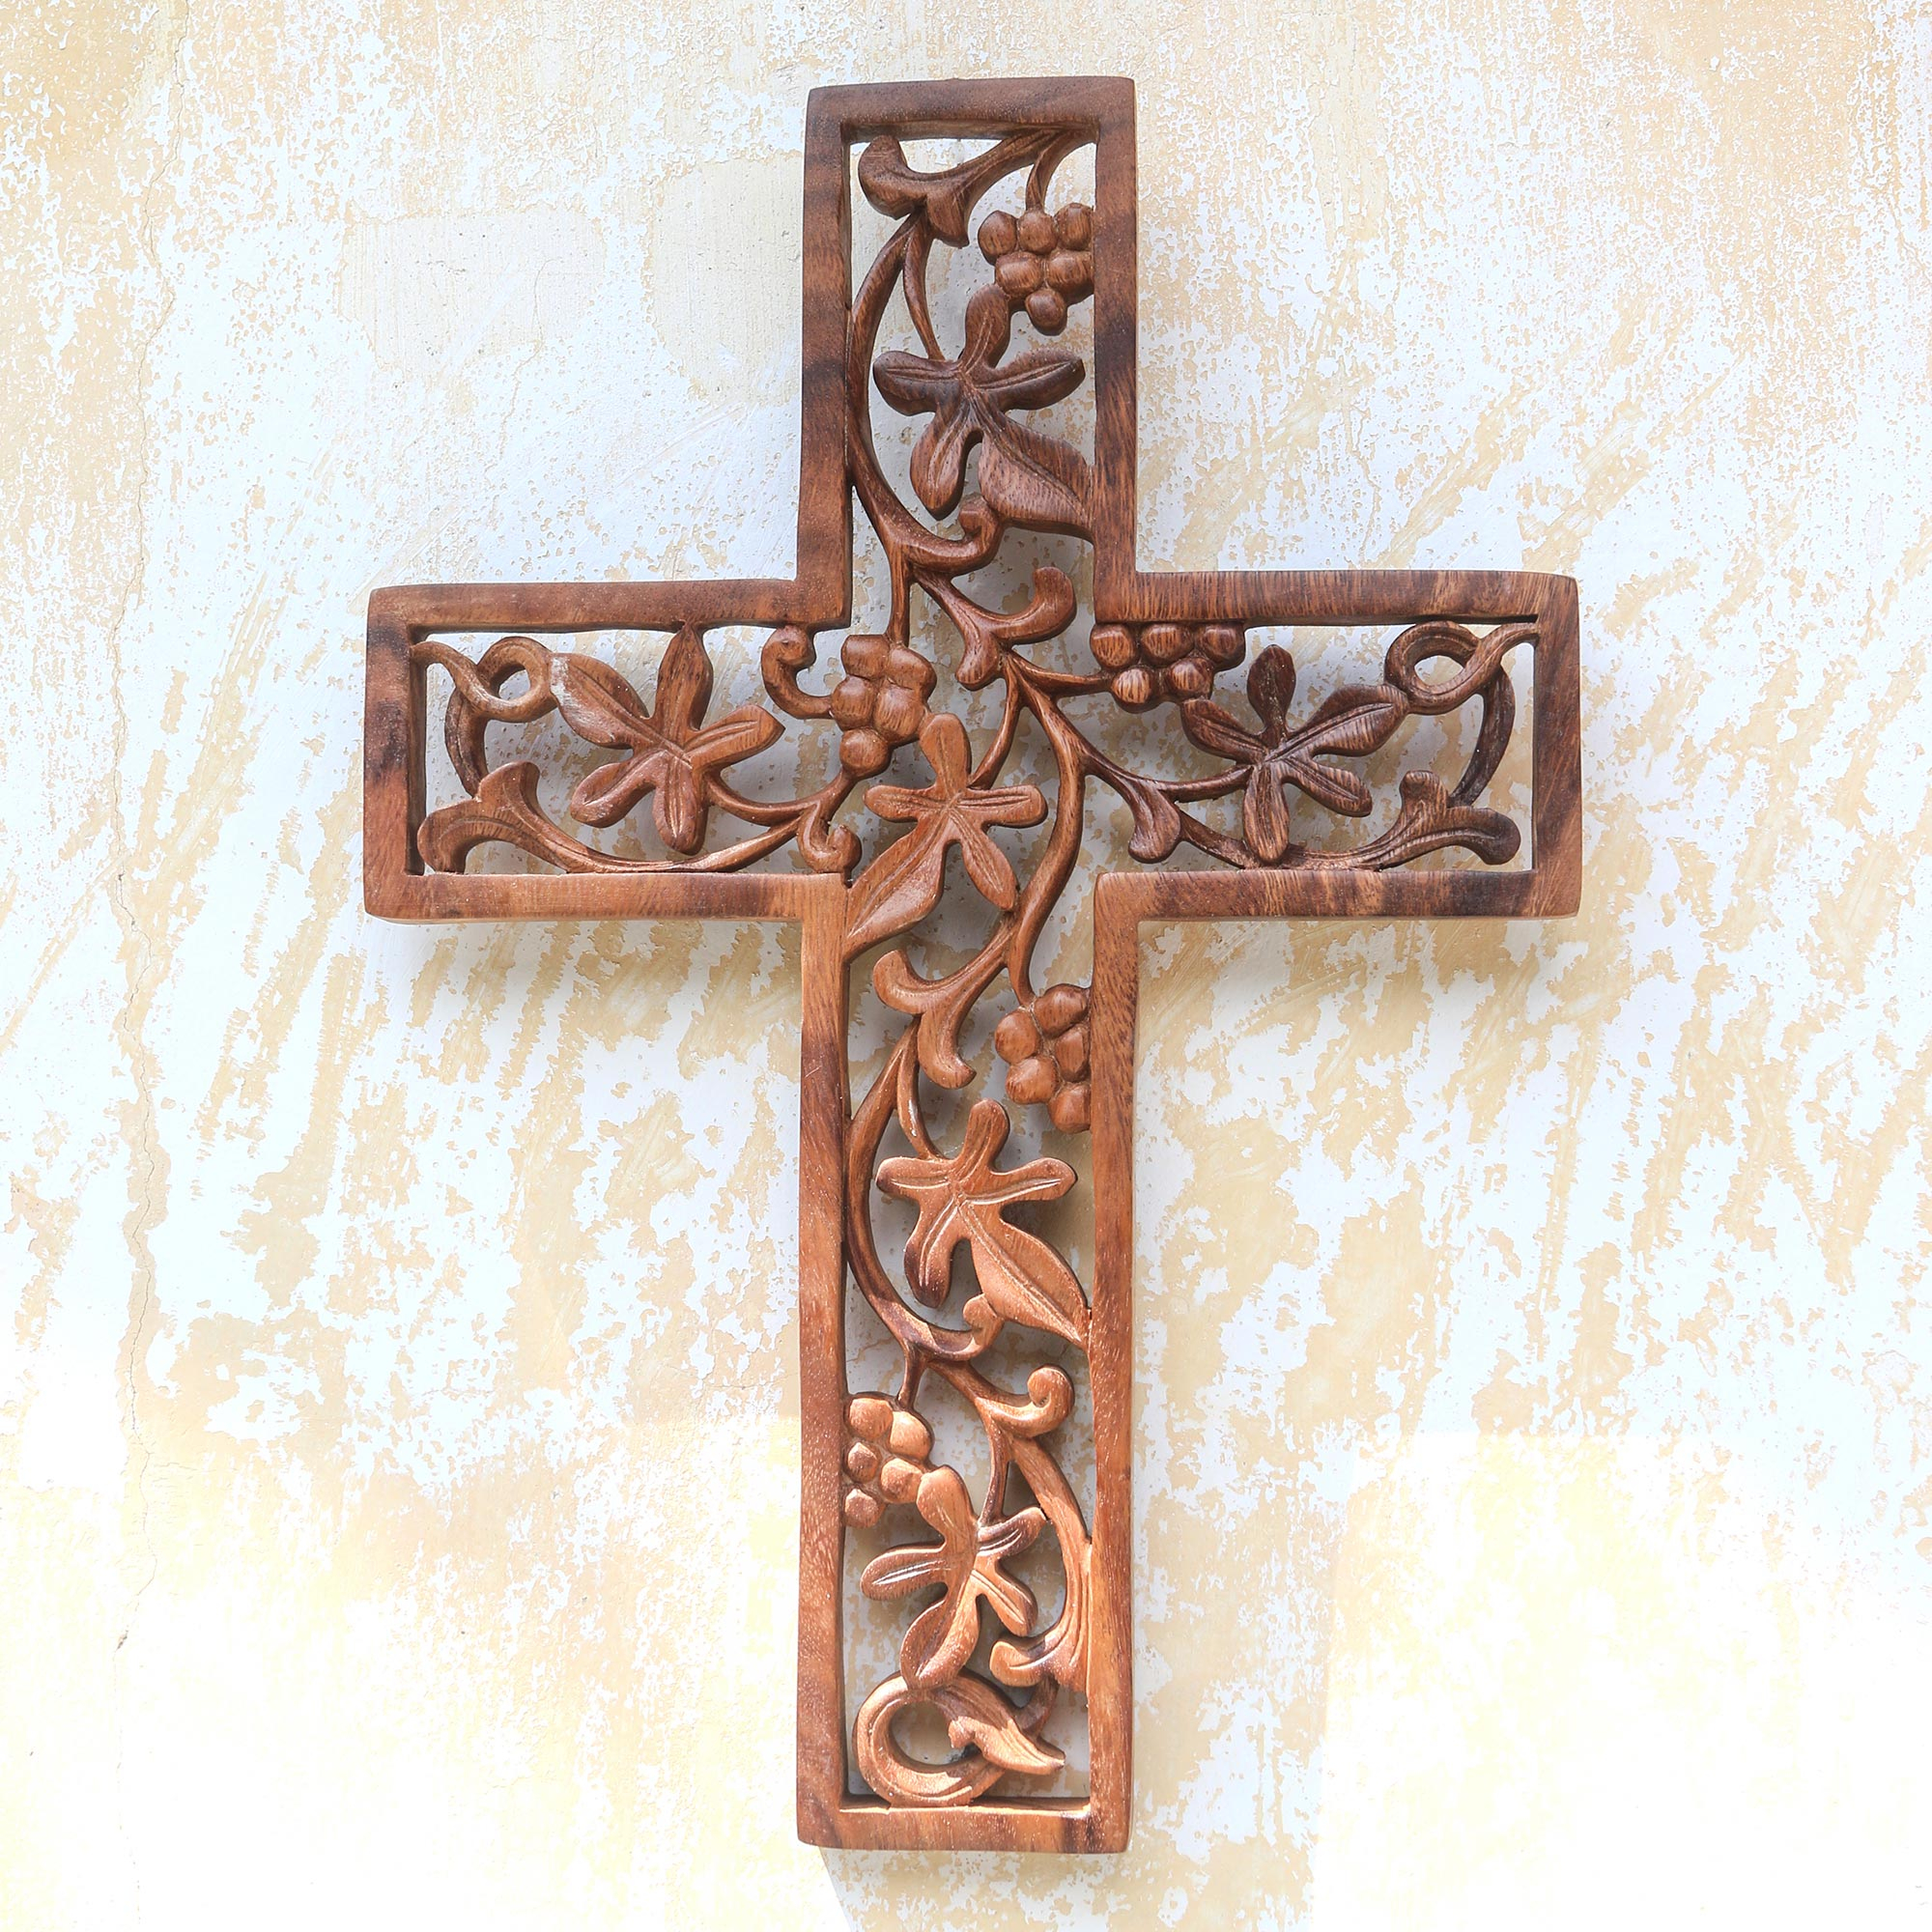 Religious Gifts, Cross with Vines Ornament